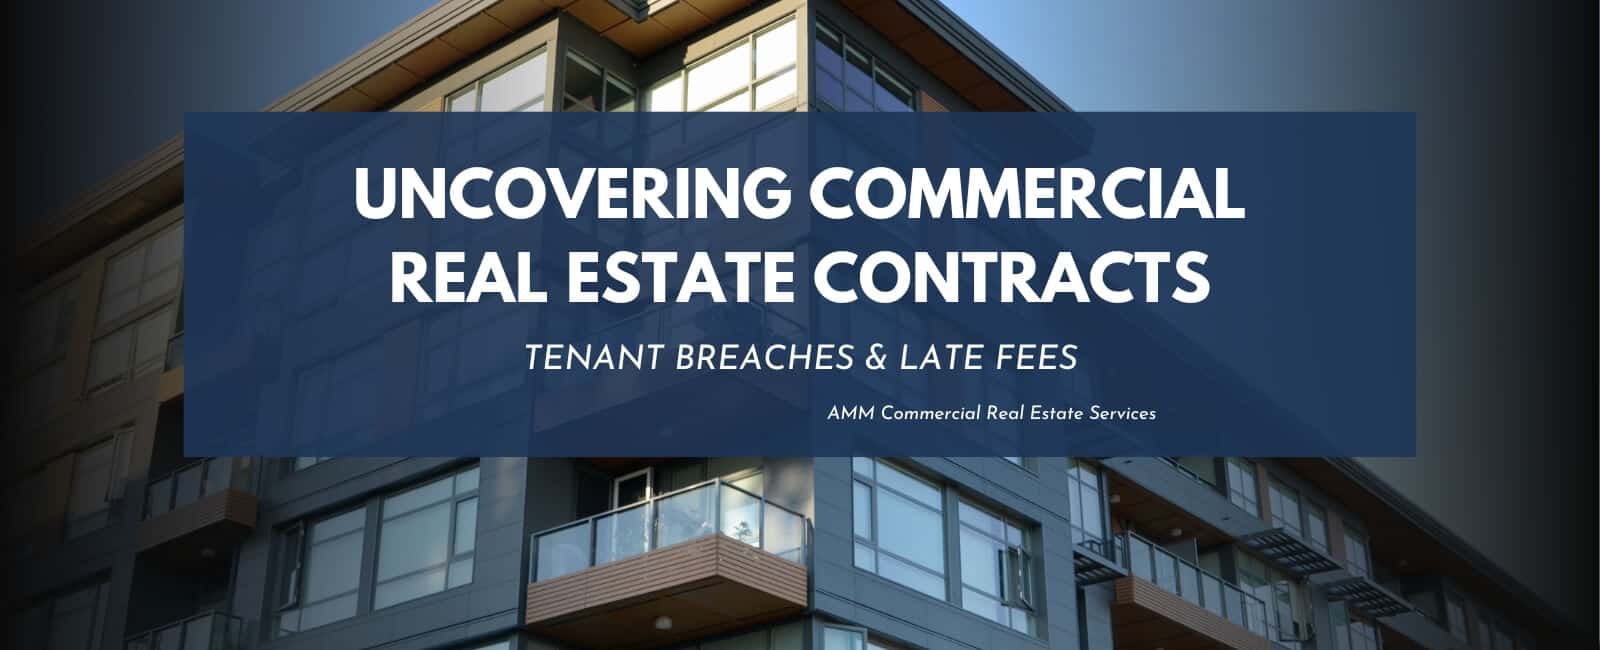 Uncovering Commercial Real Estate Contracts: Tenant Breaches & Late Fees